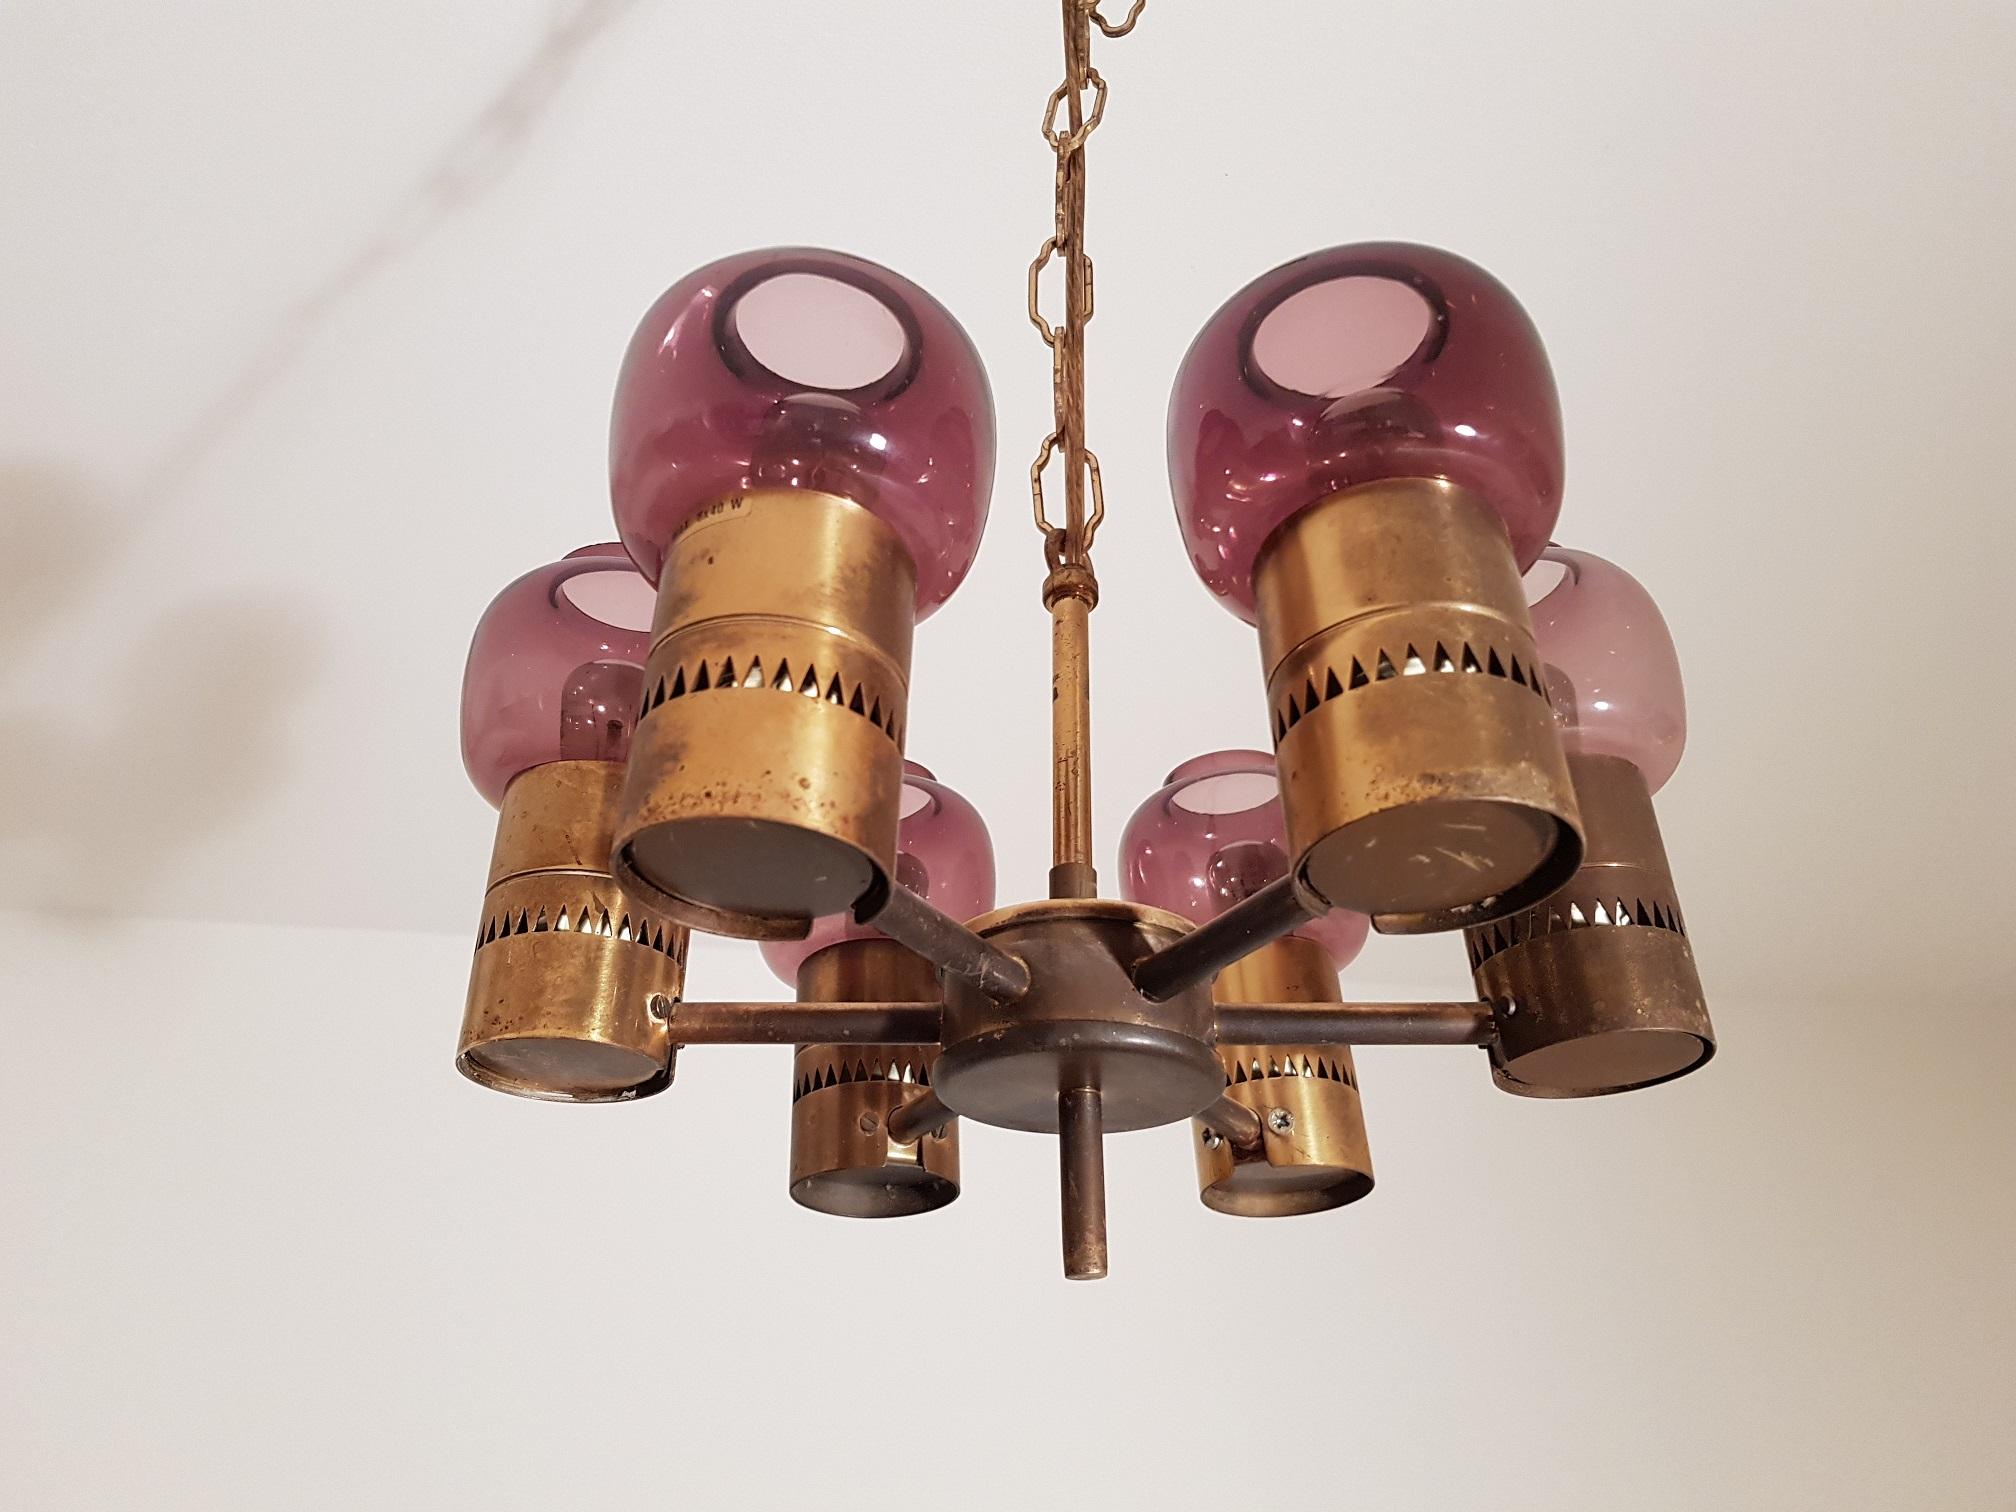 1 beautiful vintage ceiling lamp in brass and purple glass. Produced in the 1950s by Hans-Agne Jakobsson AB in Markaryd Sweden. A total of 6 light sources. Each glass case is 8 cm in diameter. Scandinavian modern design with the traditional brass